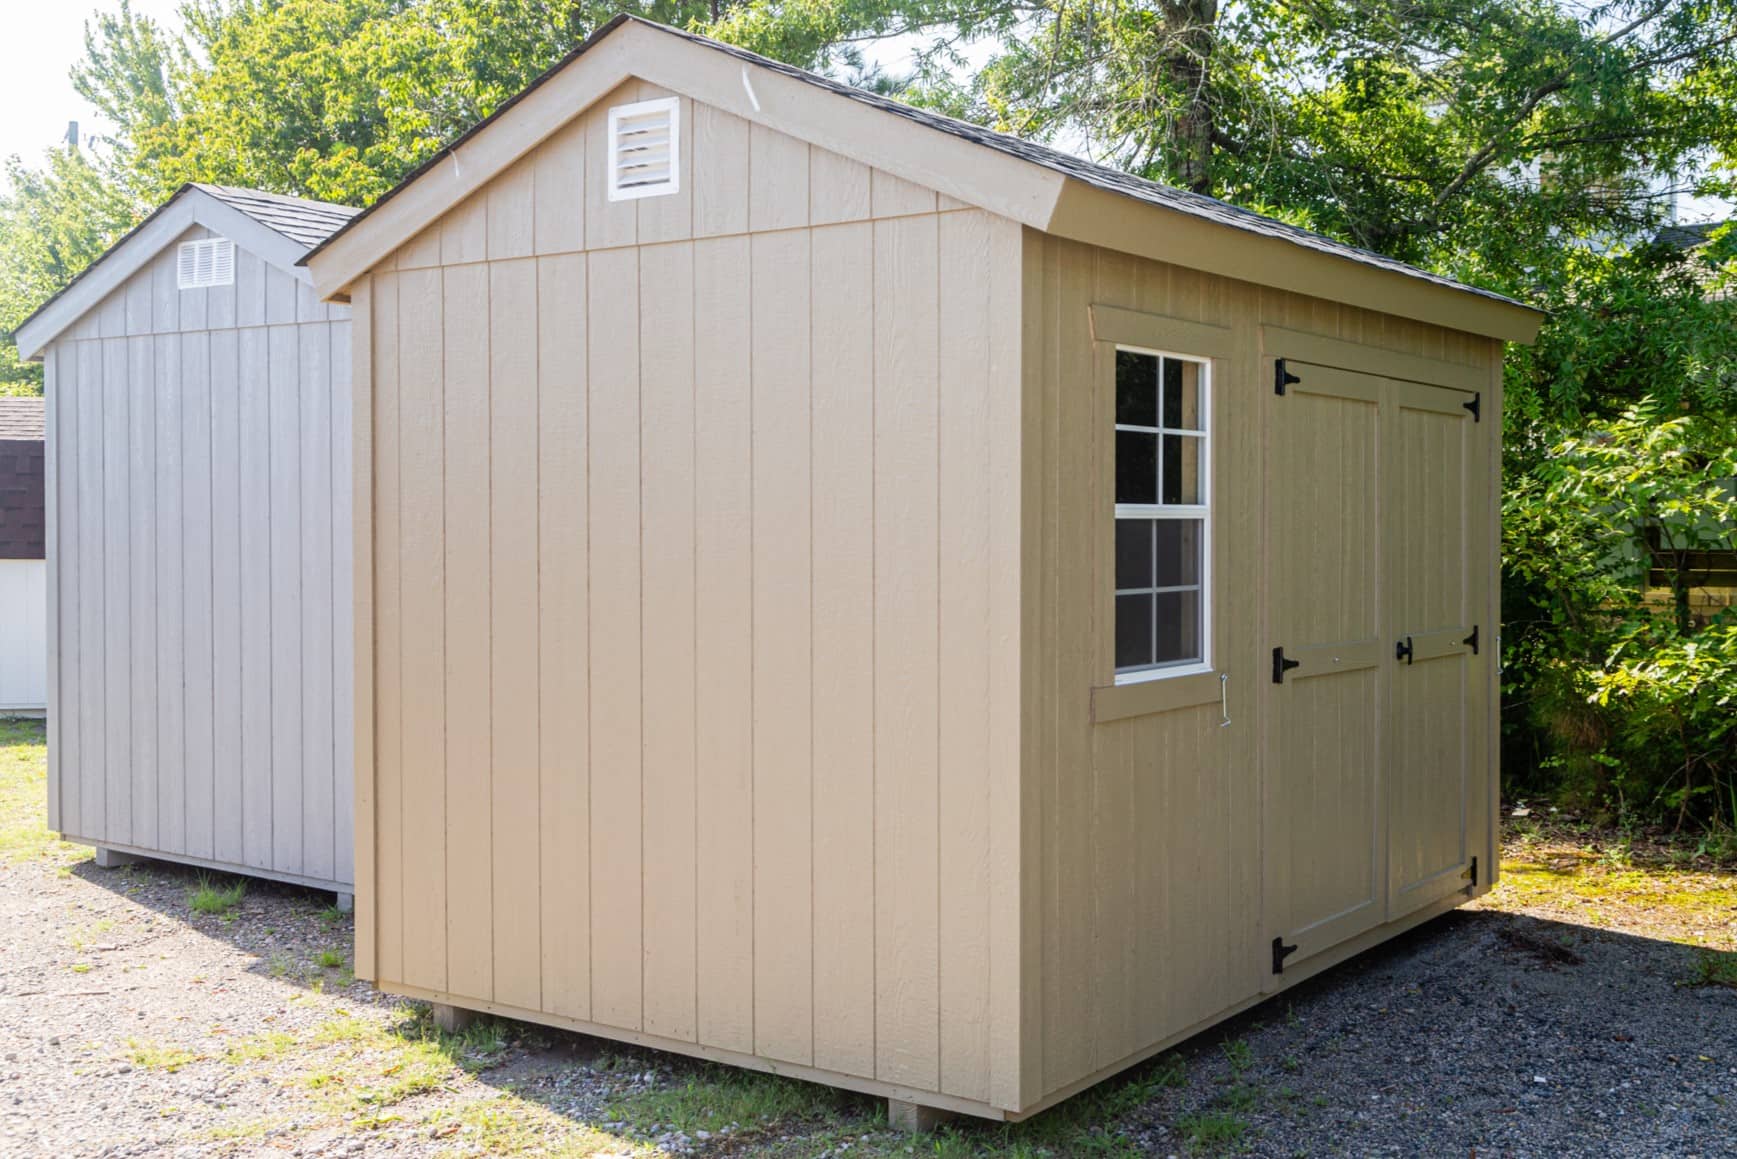 How To Prevent Mold In An Outdoor Shed